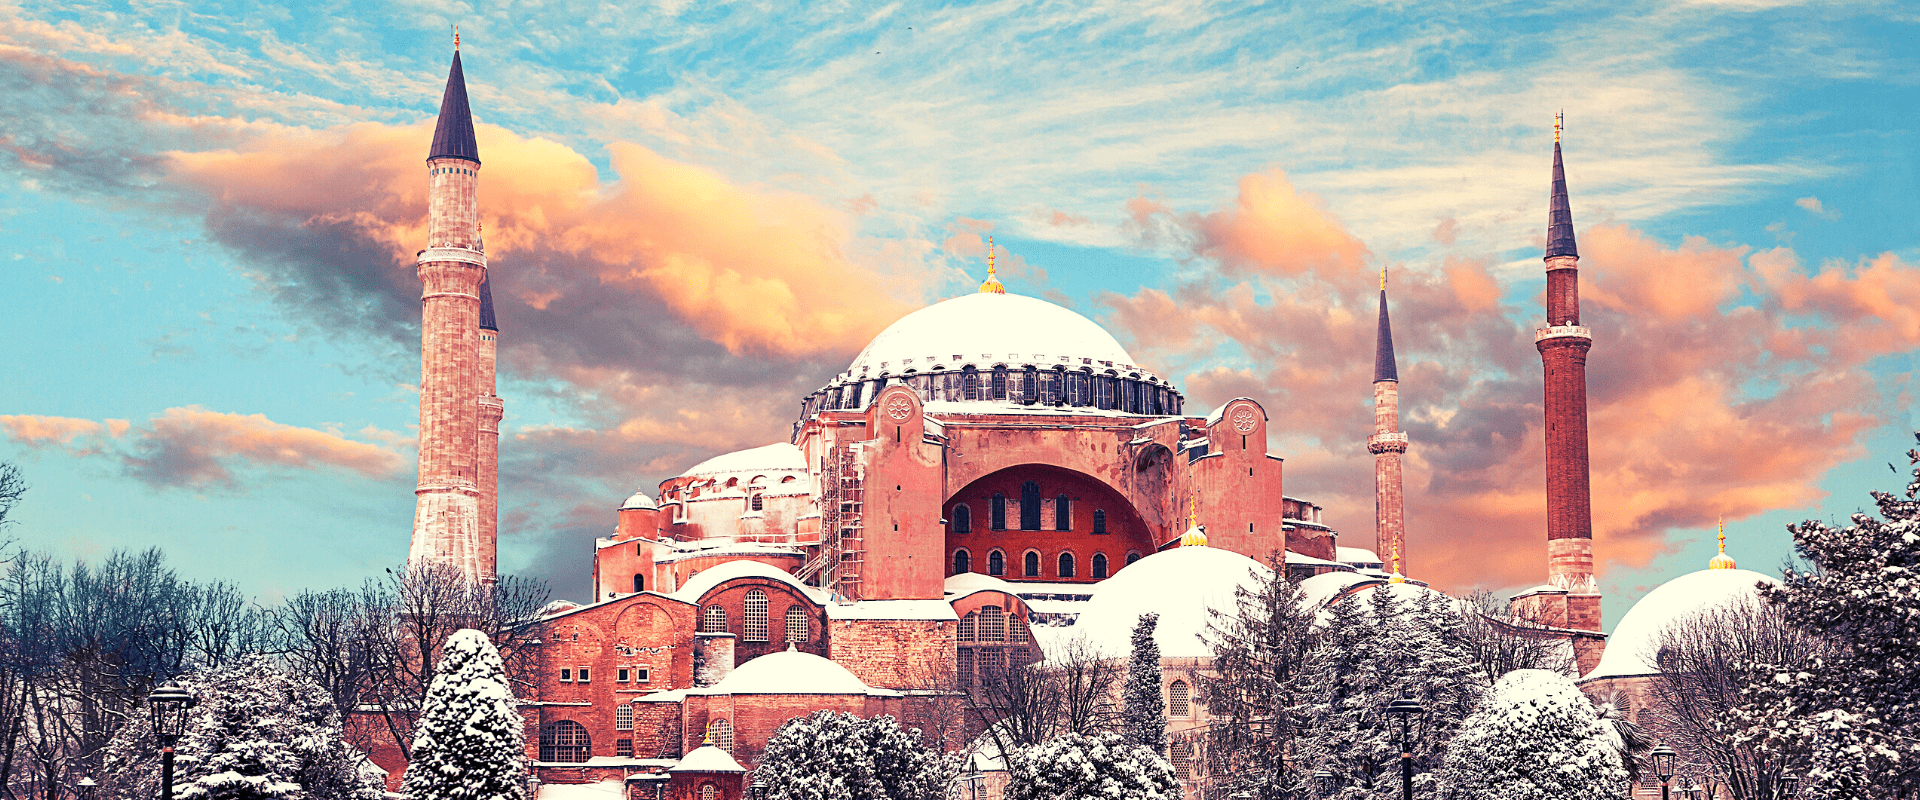 The Seven Churches of Revelation - Istanbul.